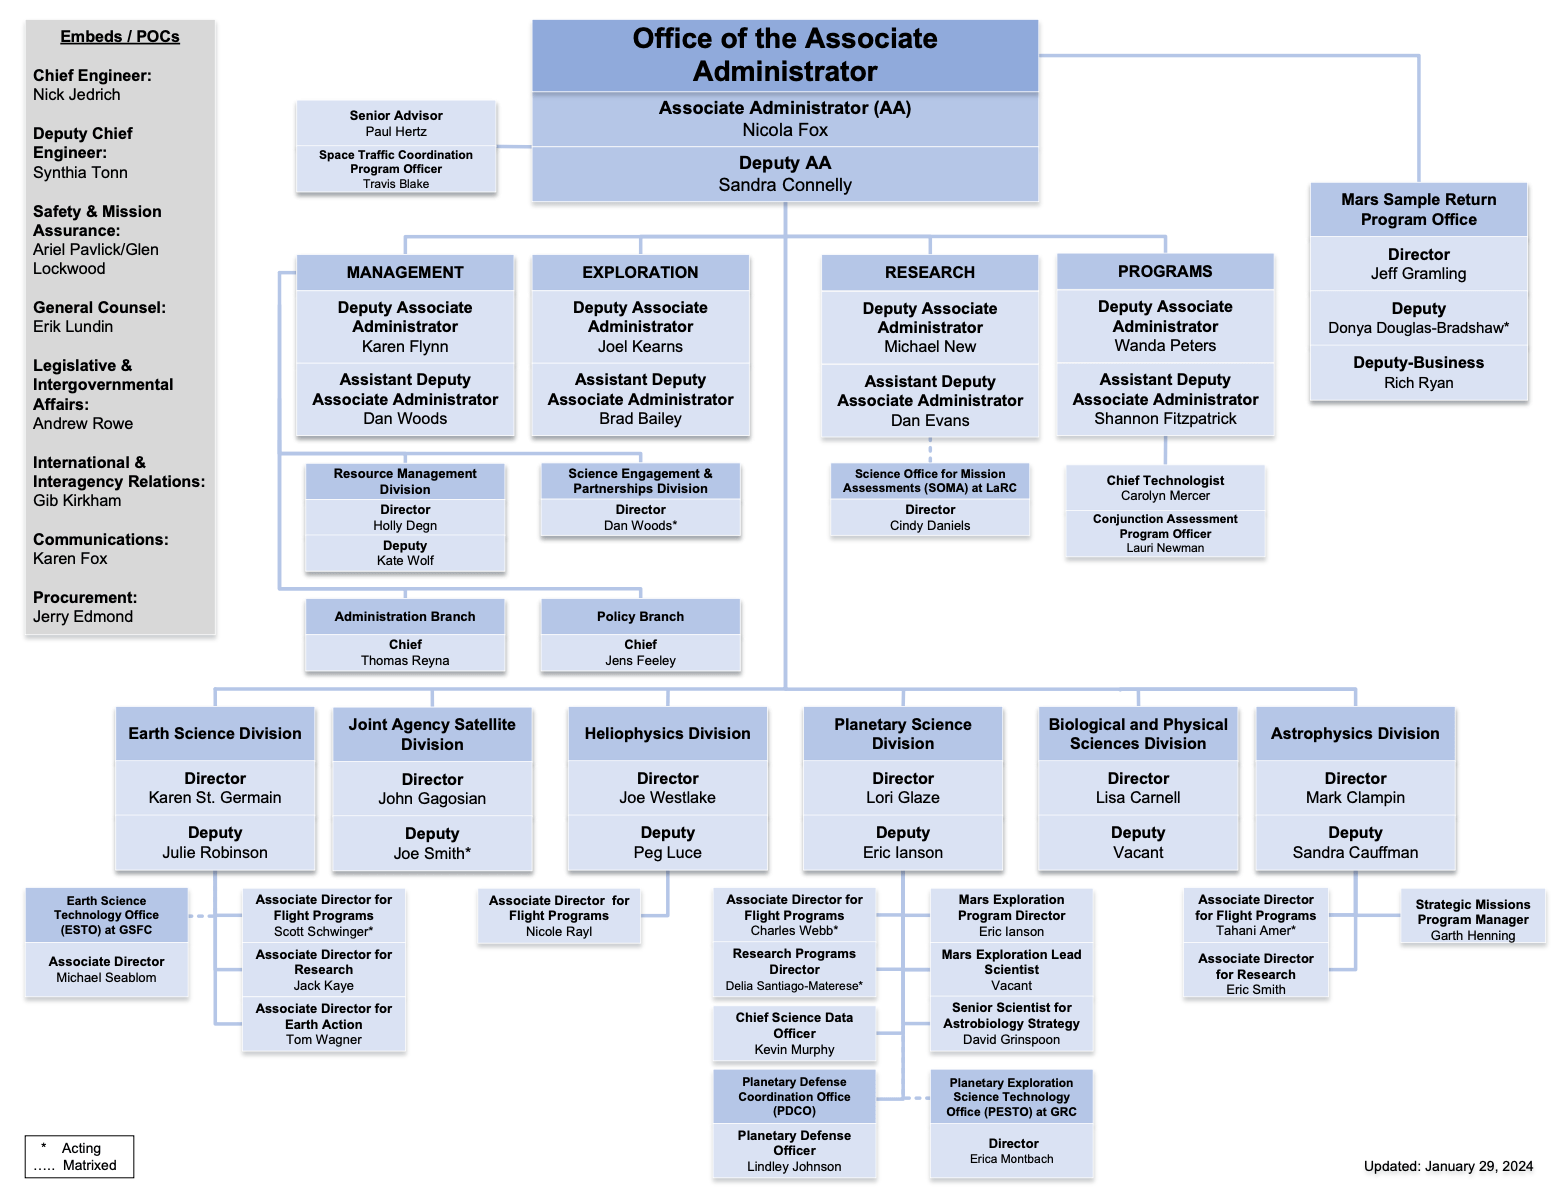 A chart illustrating the SMD leadership hierarchy